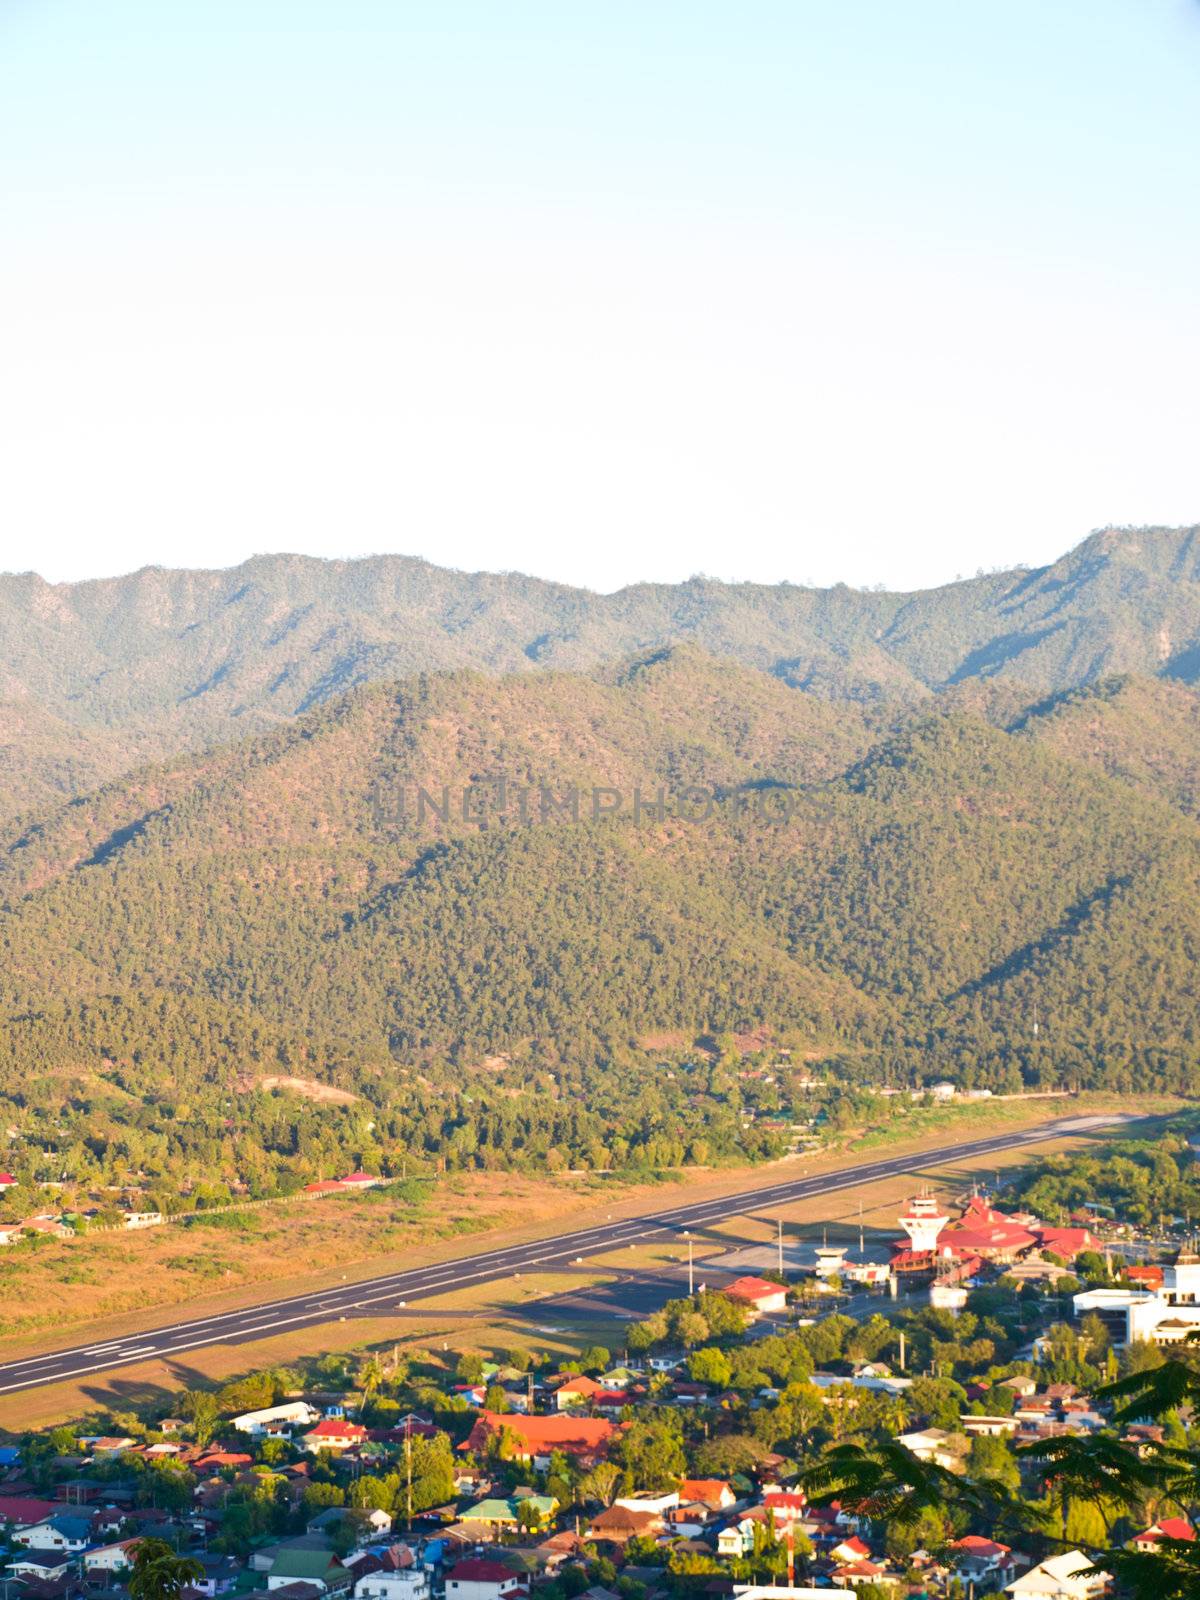 The airport is located nearby Mae Hong Son downtown surrounded by Mountains